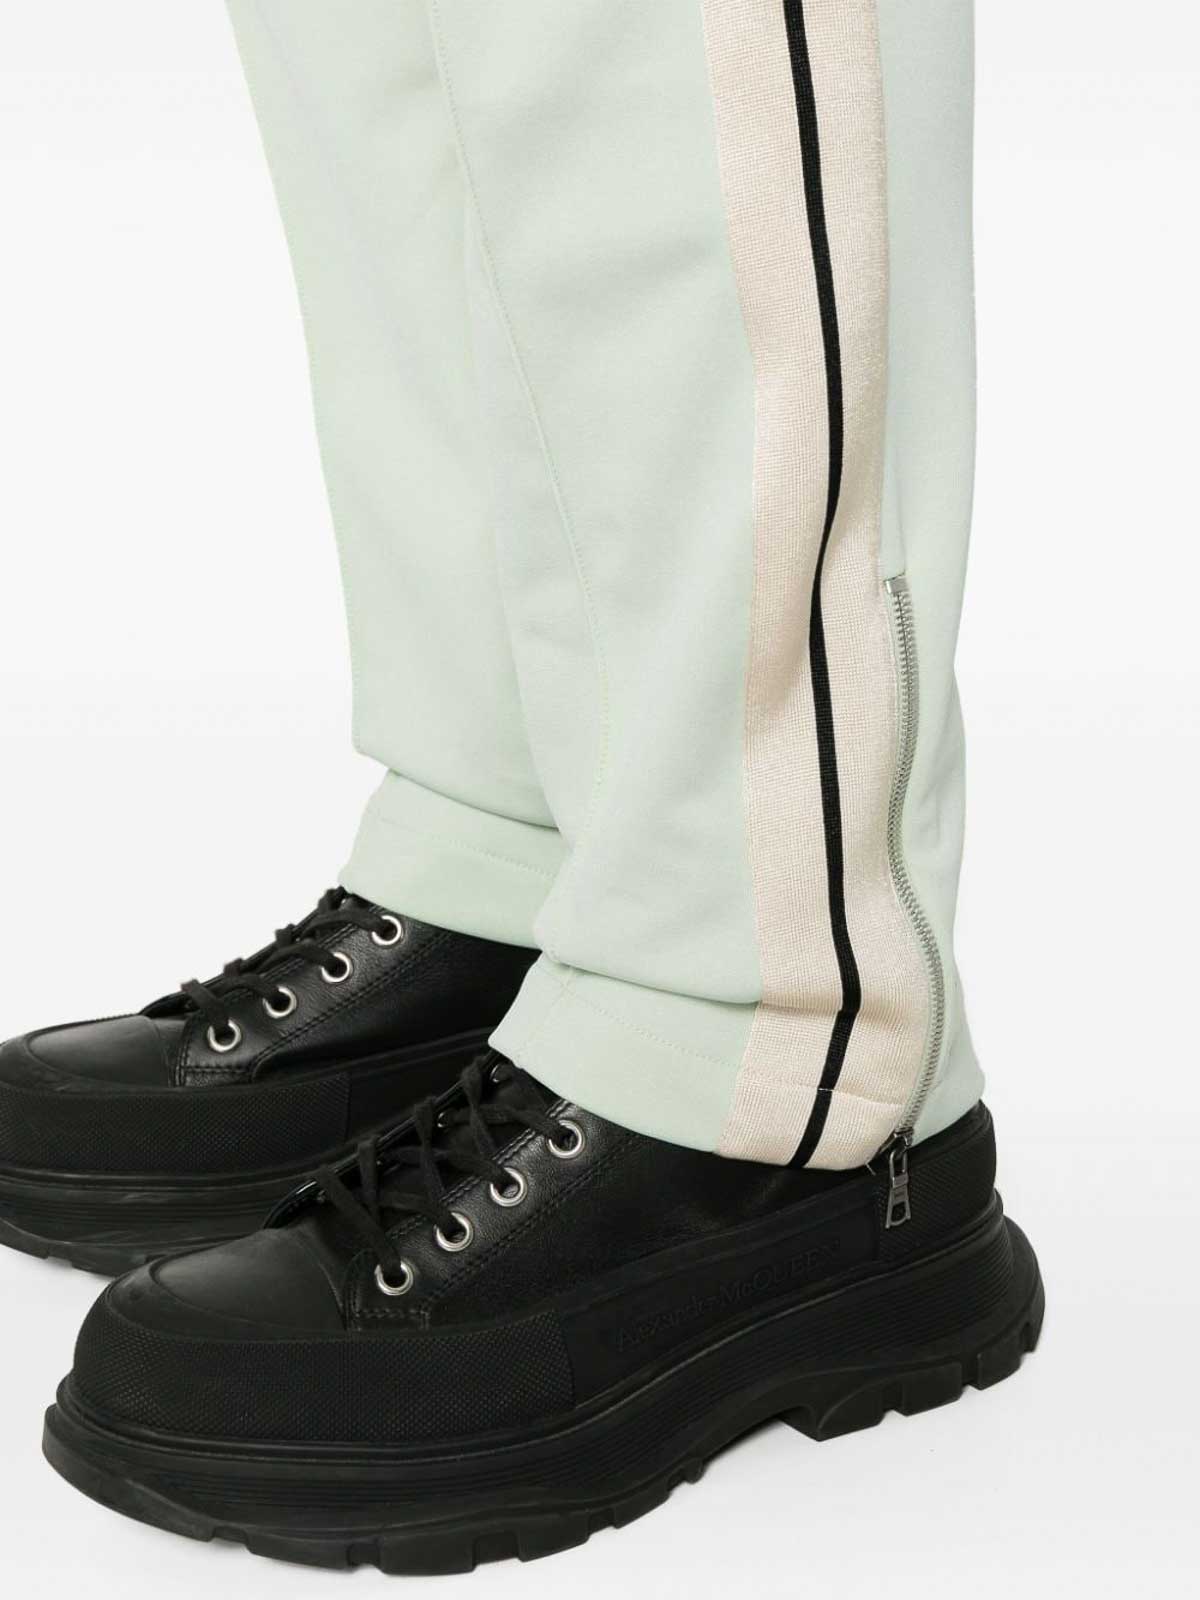 Shop Palm Angels Stripe Detail Trousers In Green